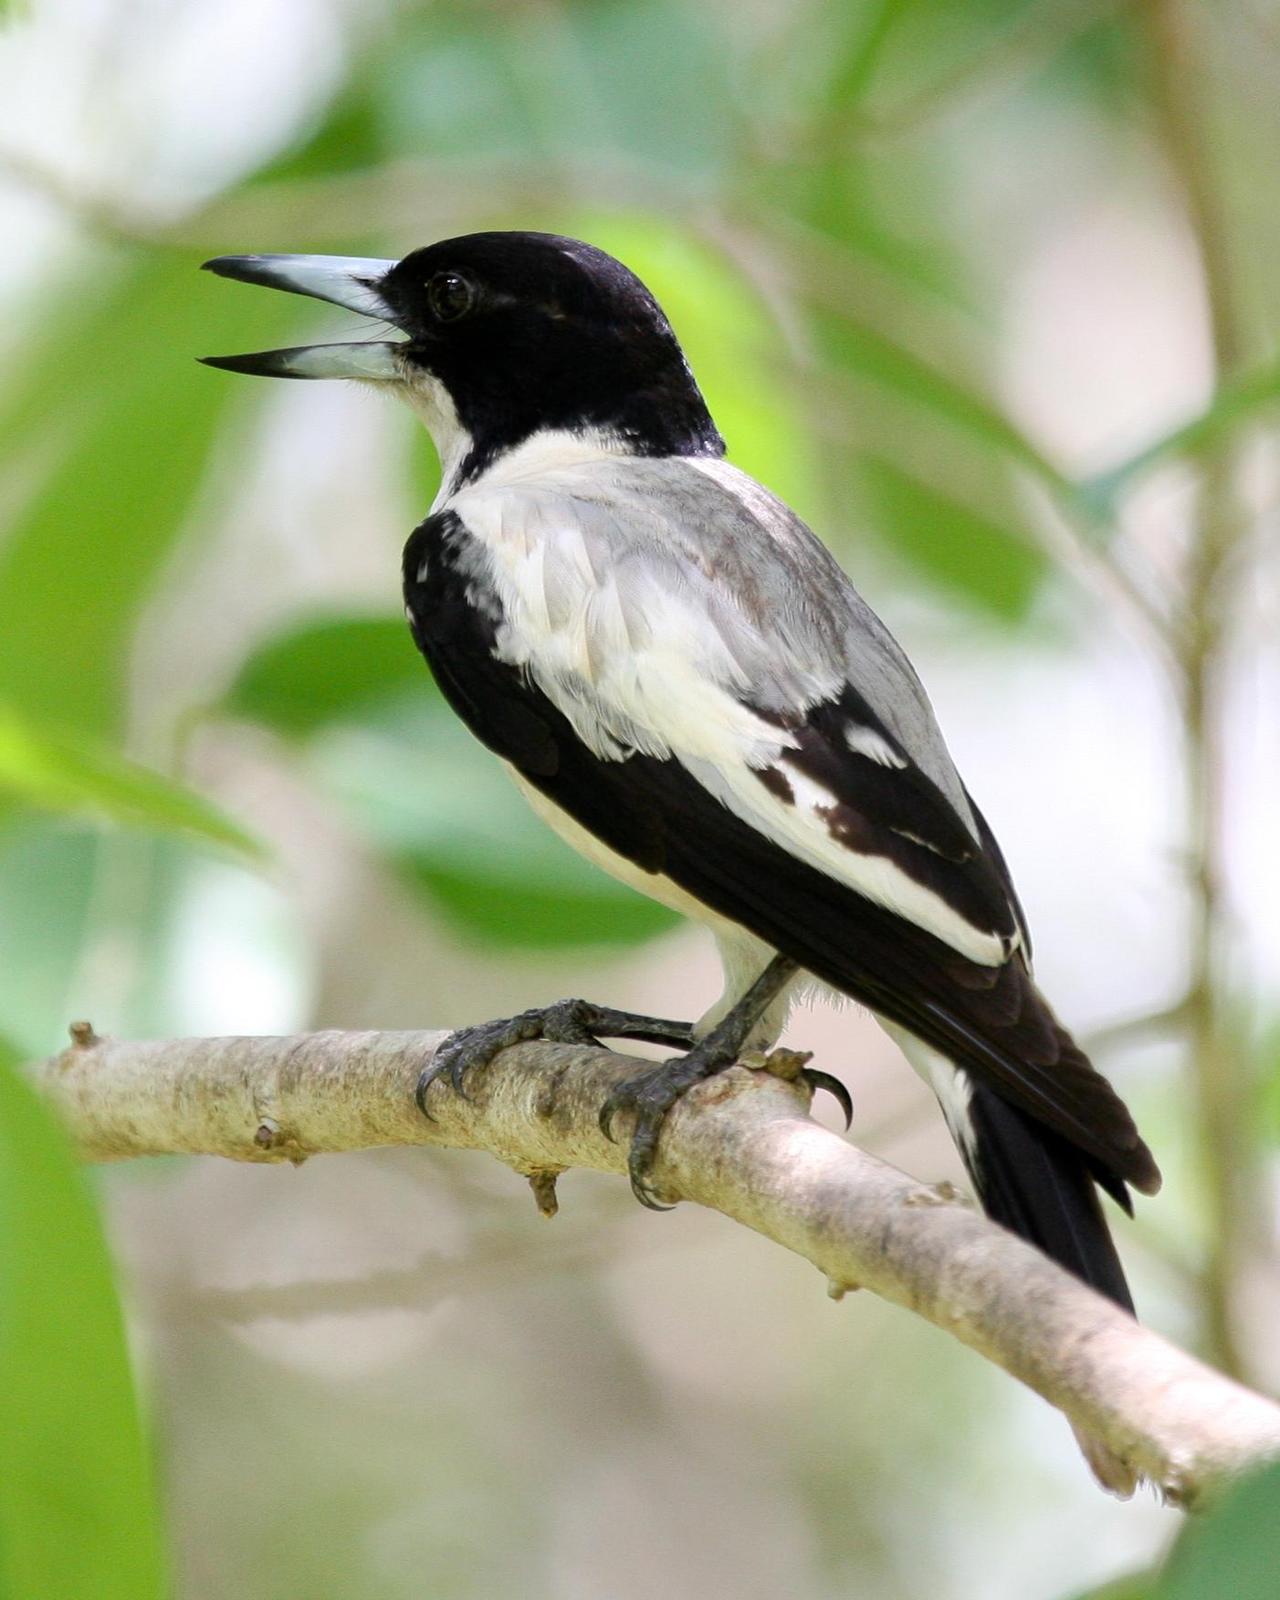 Silver-backed Butcherbird Photo by Robert Lewis